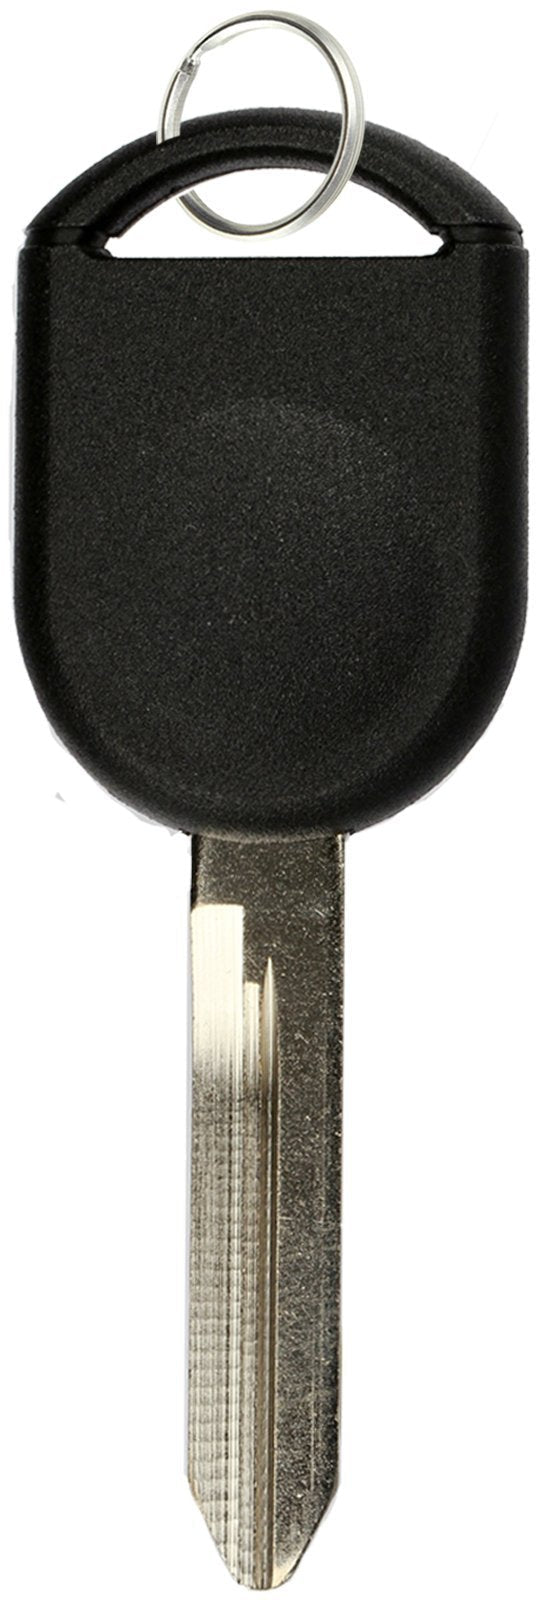  [AUSTRALIA] - KeylessOption Replacement Uncut Ignition Chipped Car Key Transponder Blank for Ford Lincoln Mercury Mazda